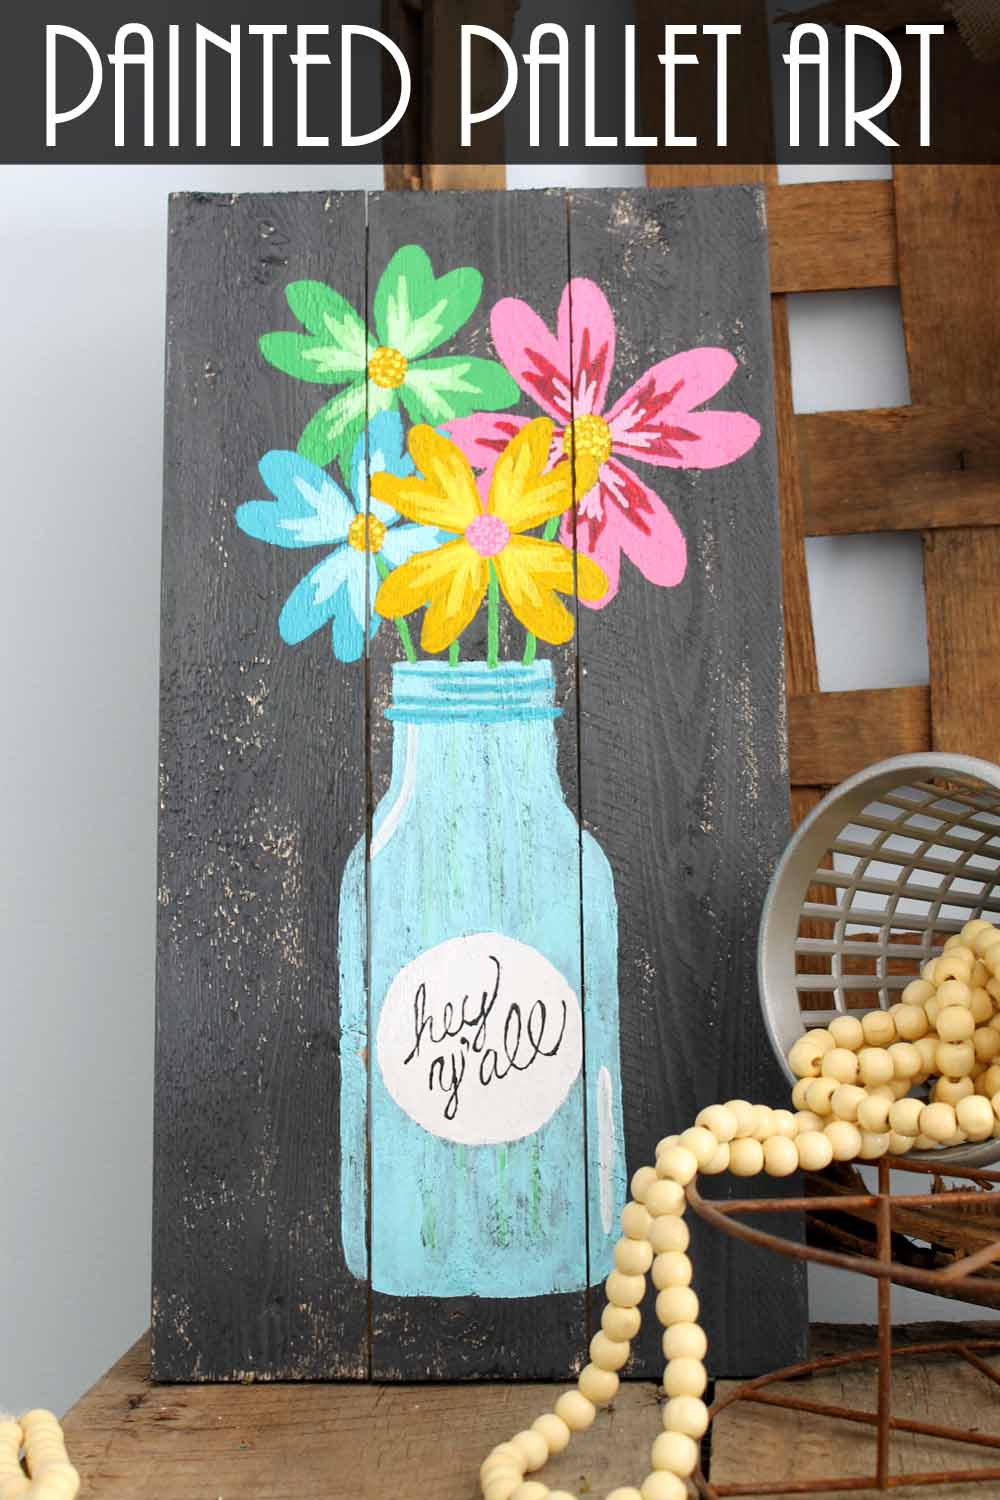 painted pallet art craft with a jar and flowers